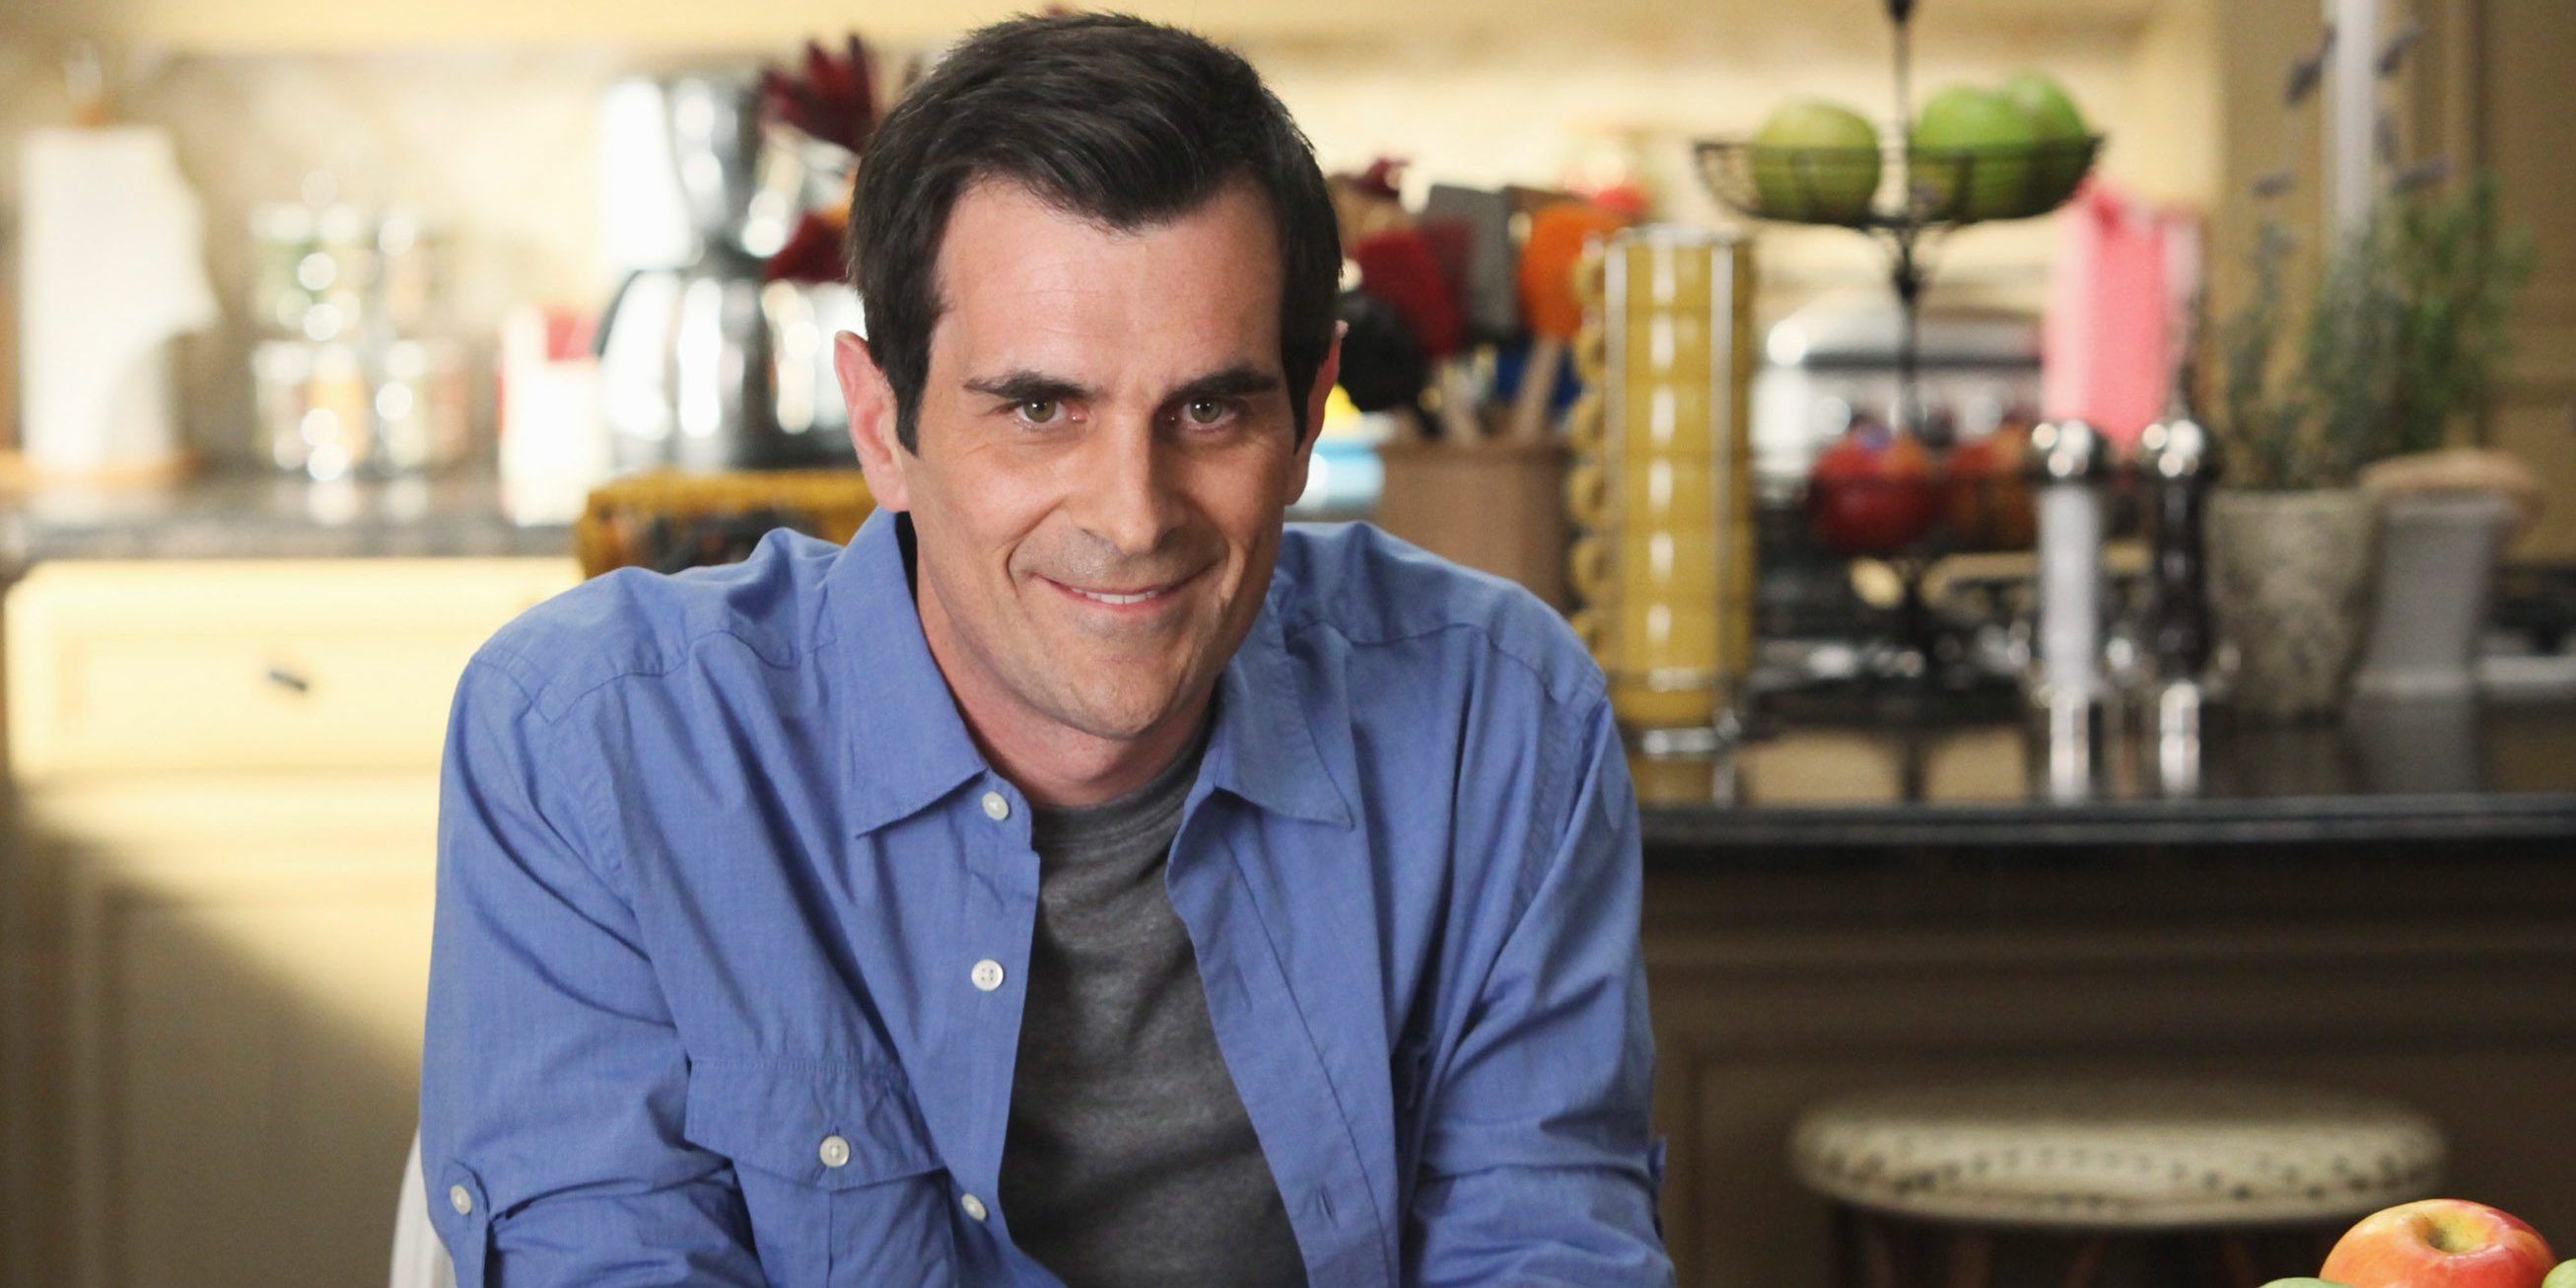 Phil Dunphy looking at the cameras in season 1 of Modern Family